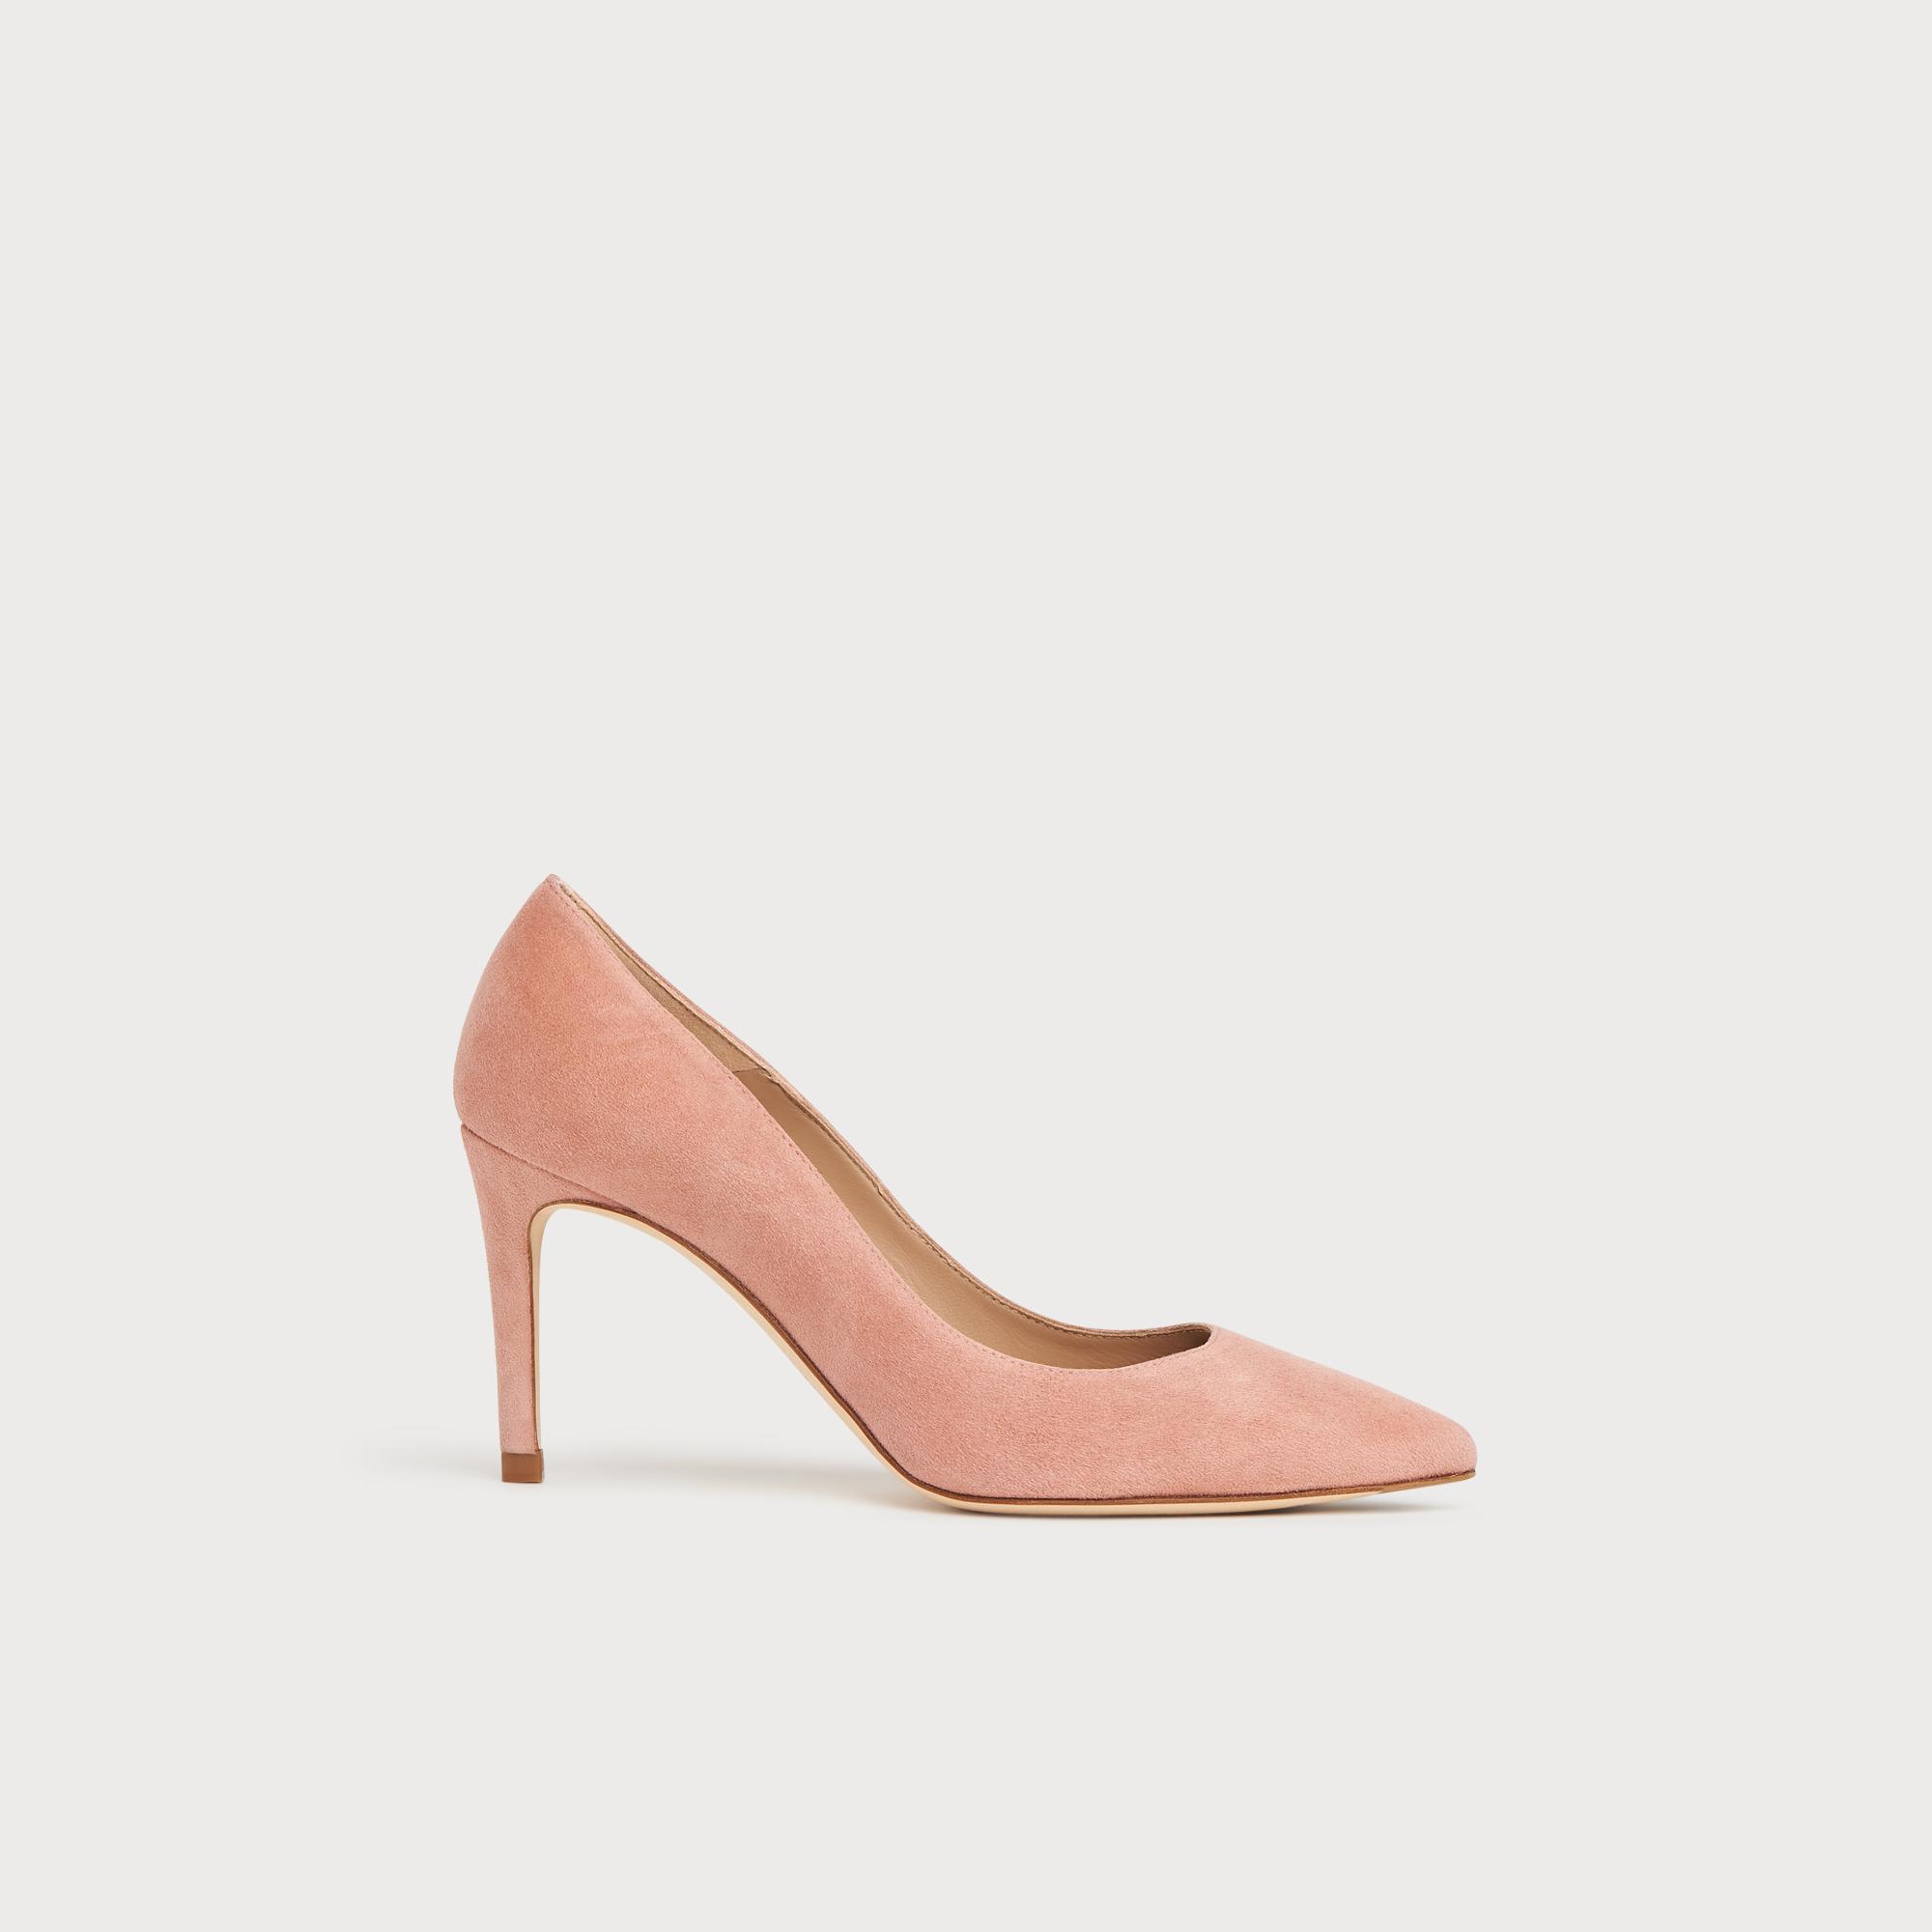 suede pink court shoes